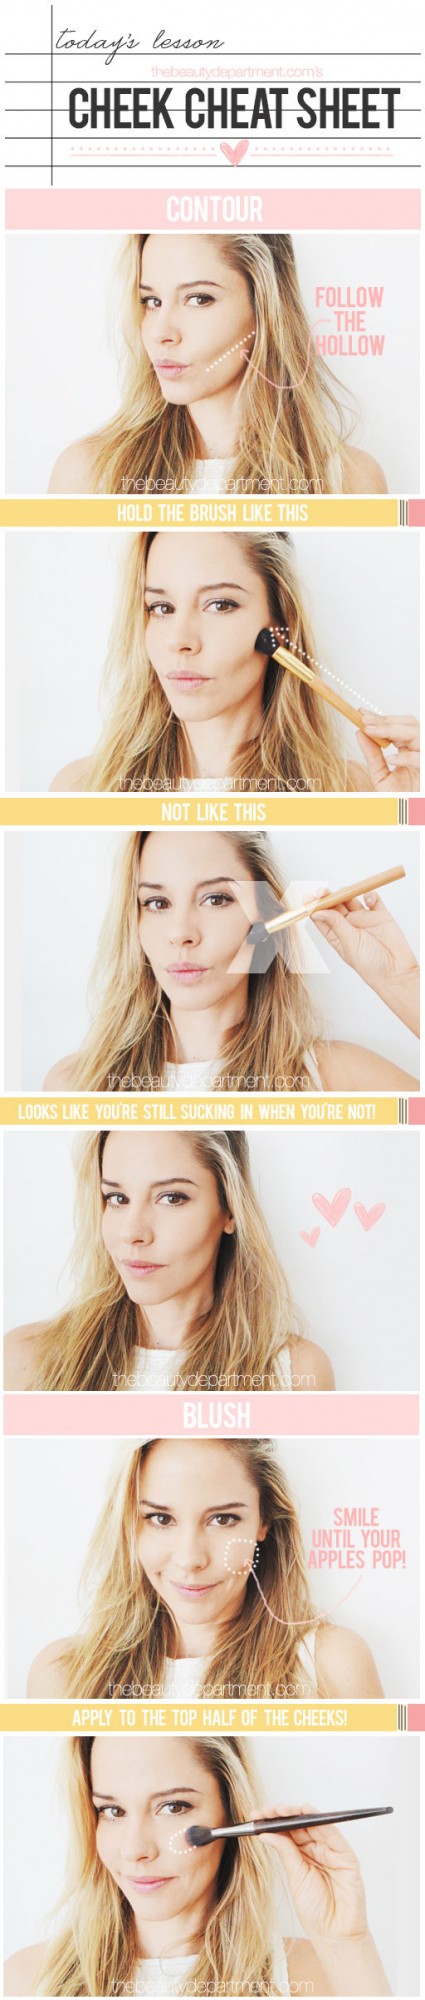 16 Basic Tips Tricks and Ideas For Perfect Makeup (11)